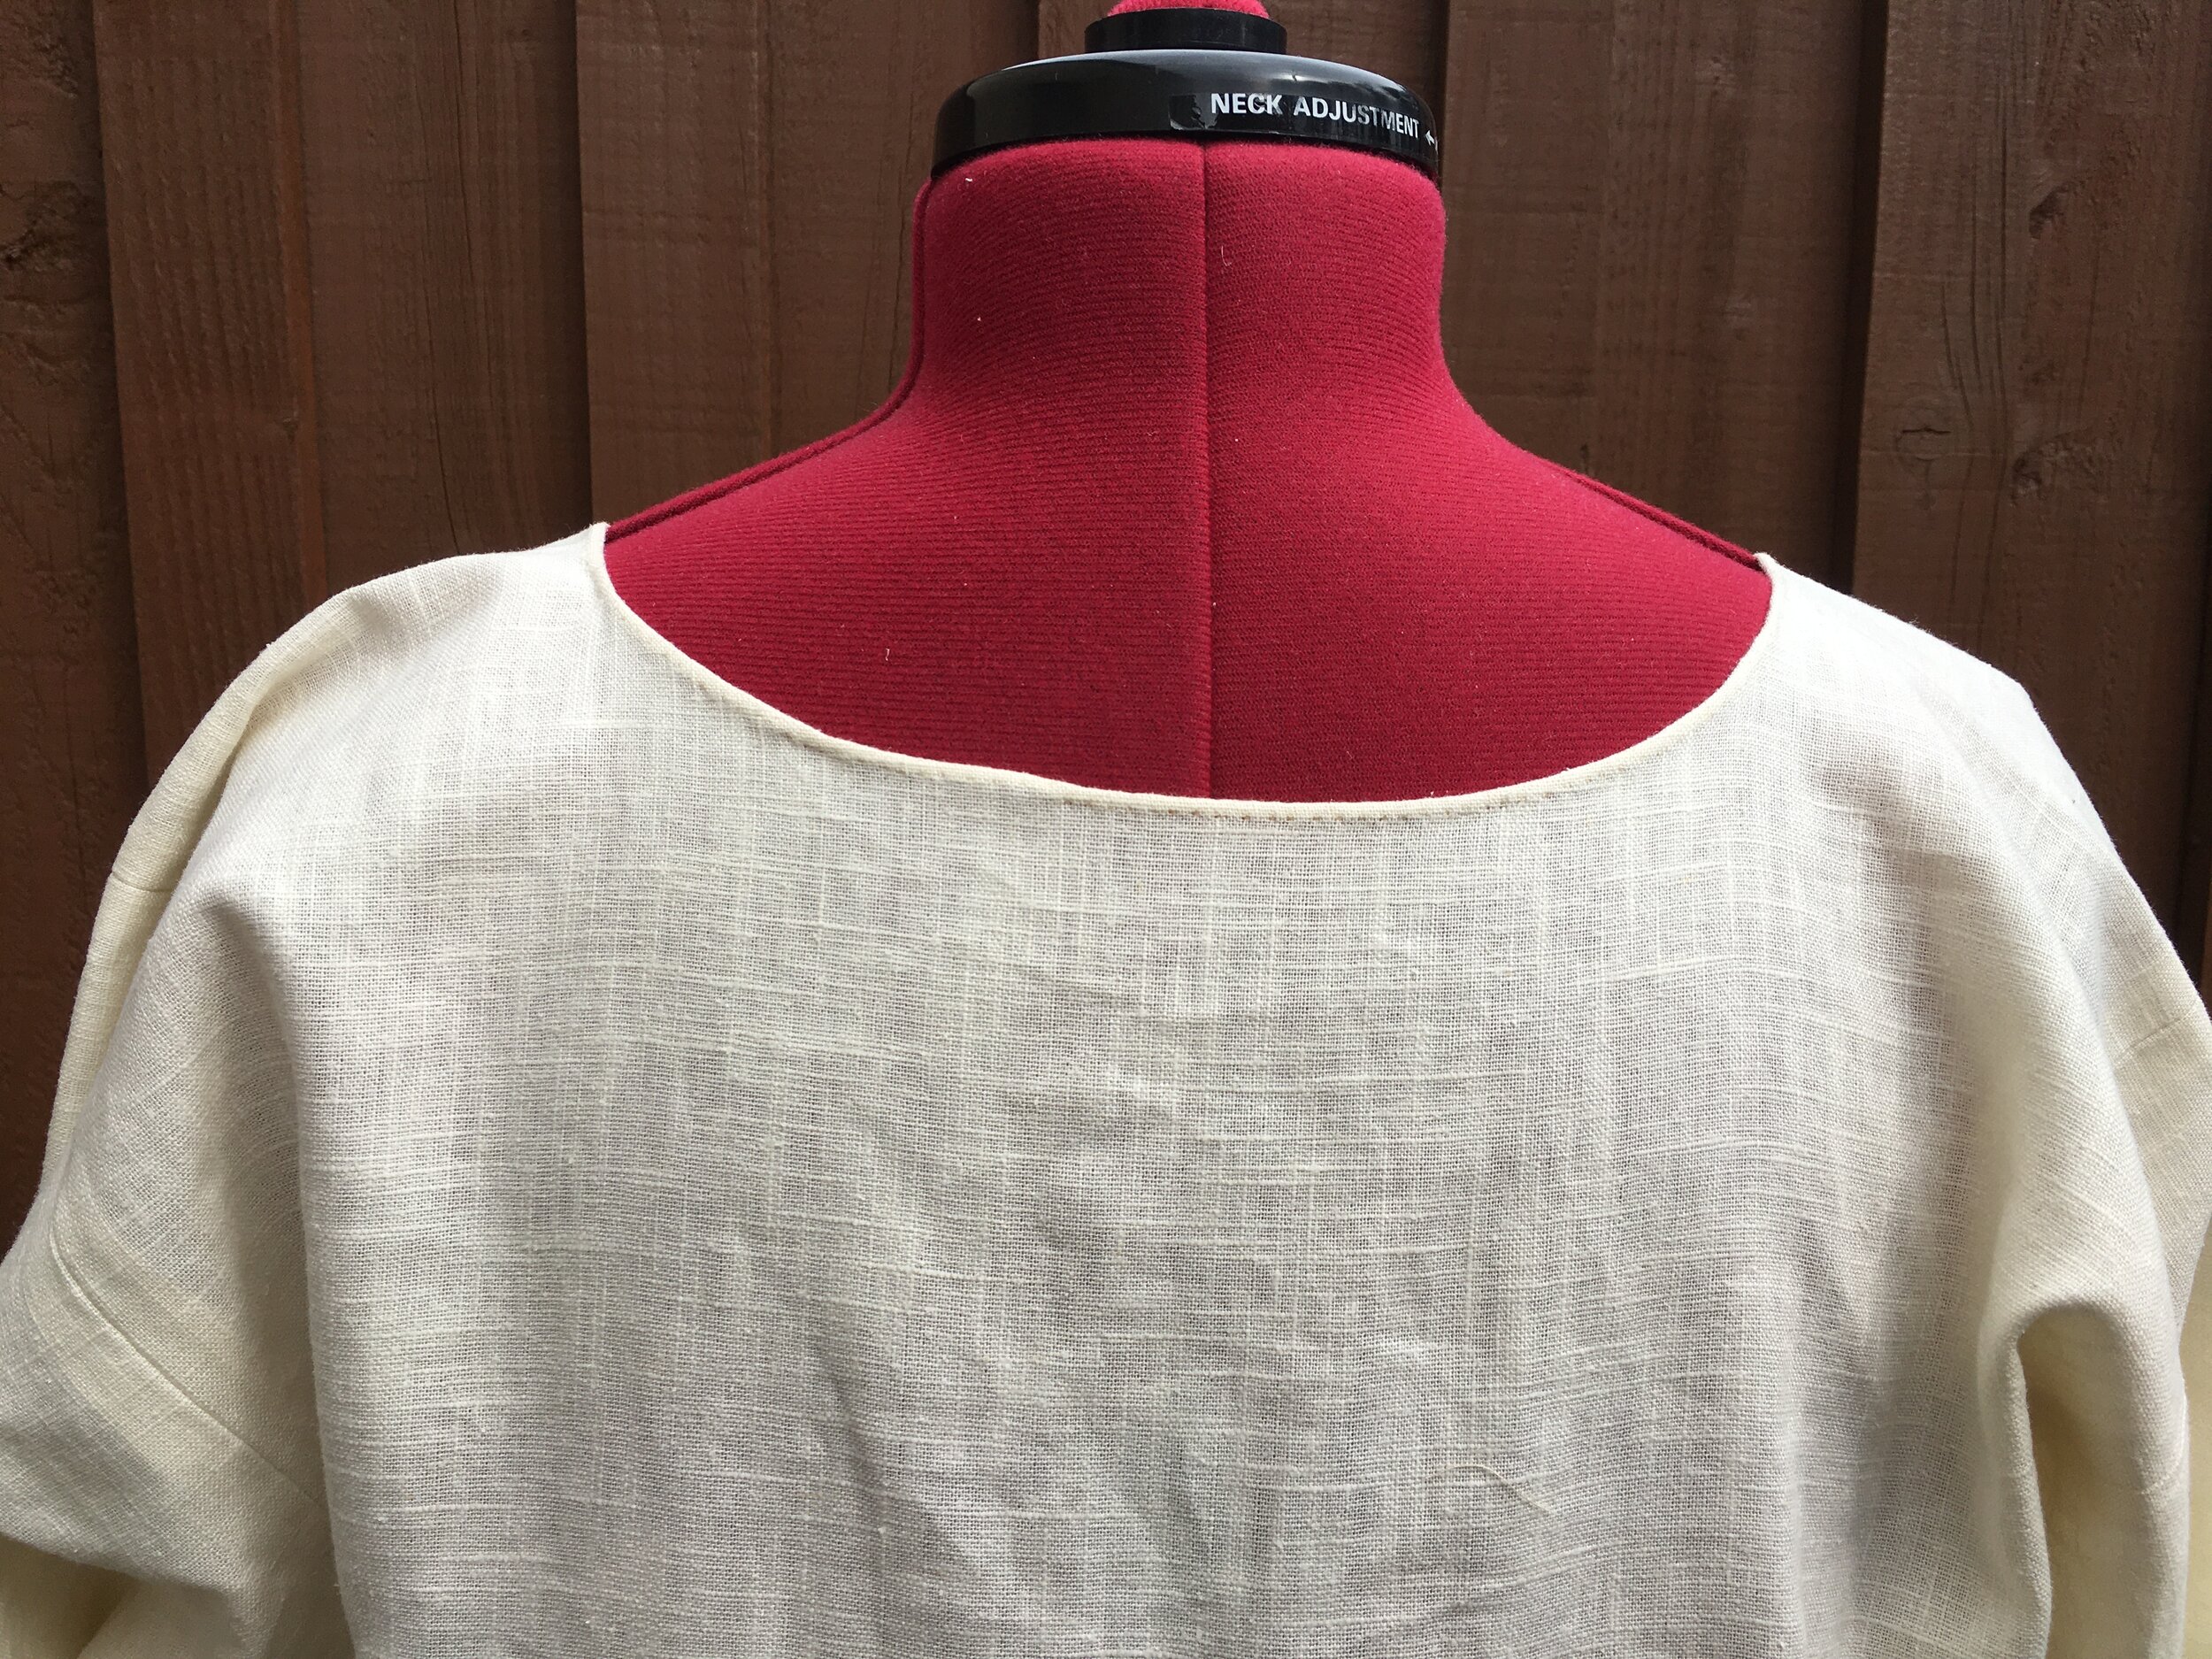 Shift with round neck